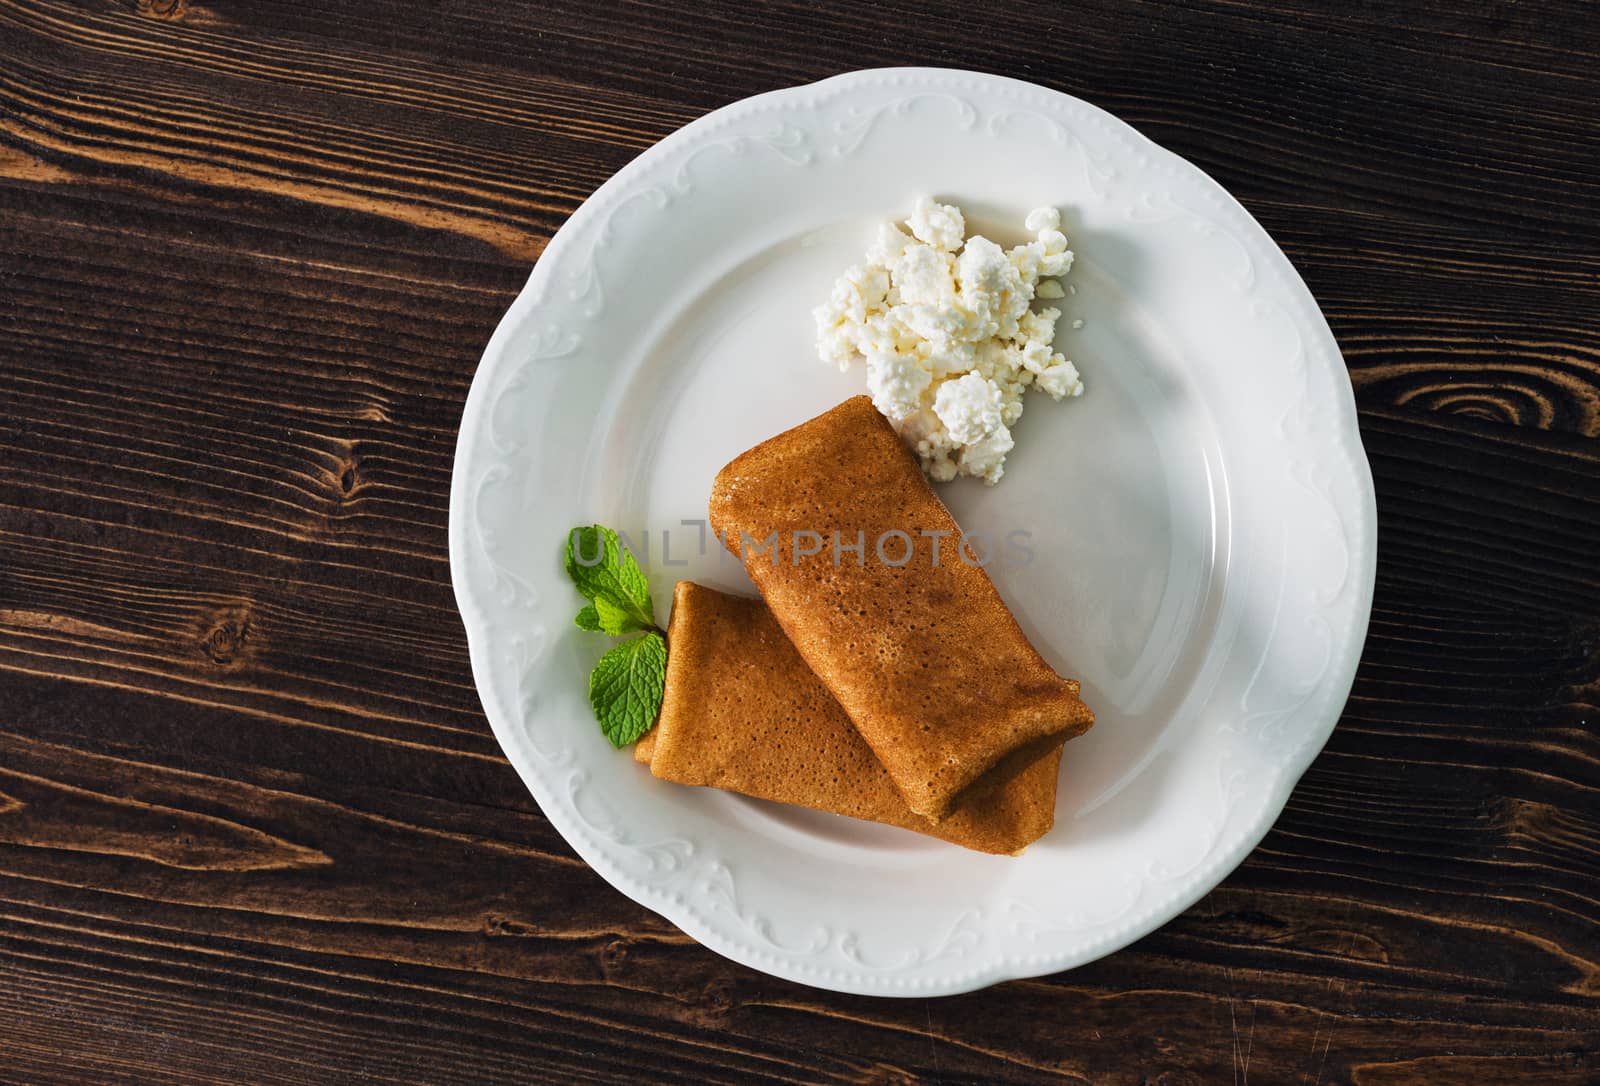 Pancakes with condensed milk on a plate, wooden background